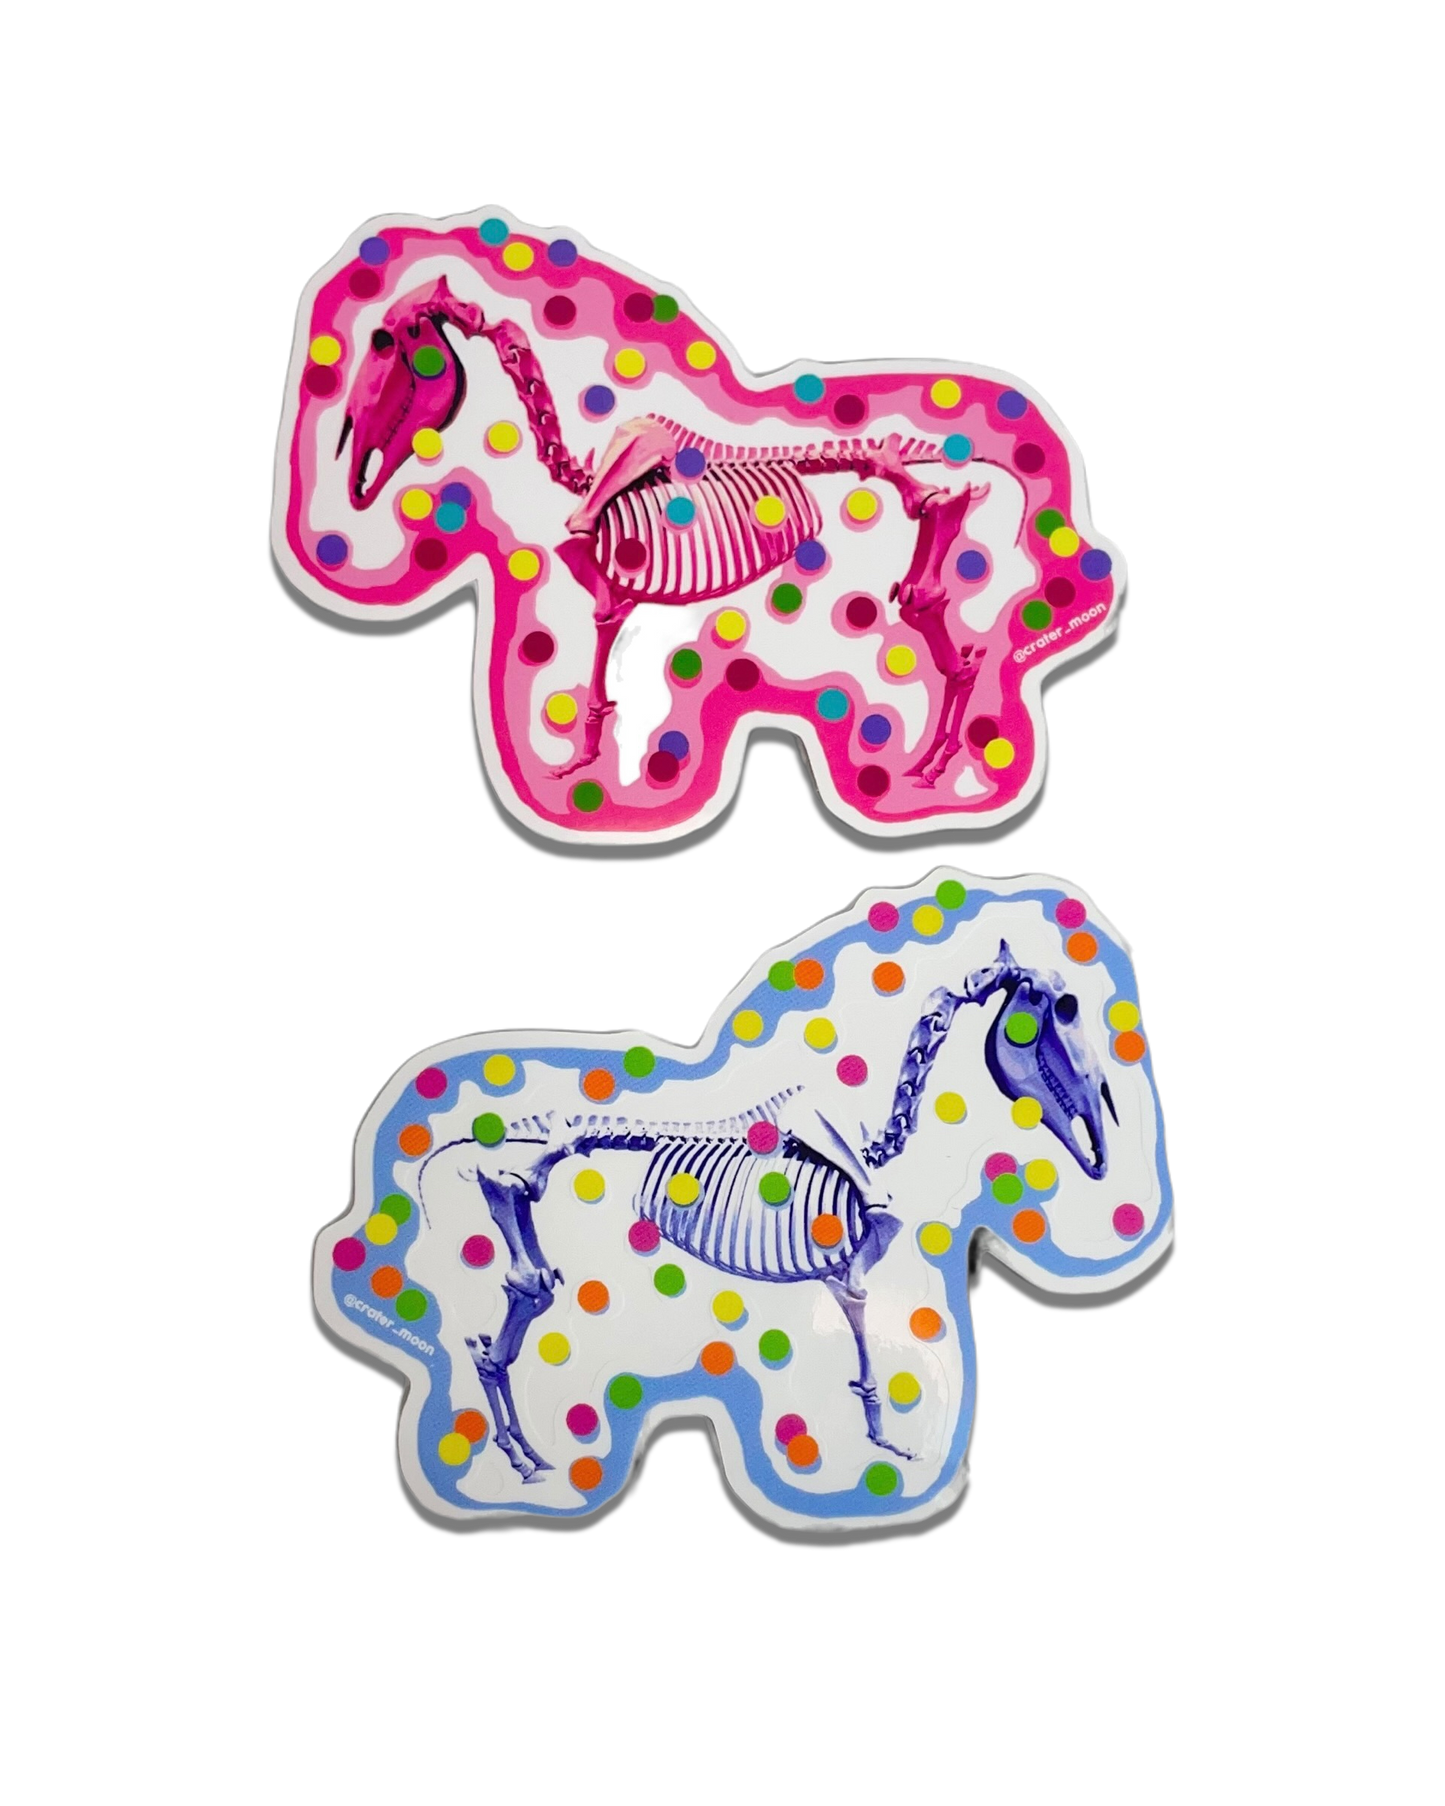 NEW Larger 4"Clear Animal Cracker Sticker Set in Pink & Blue by Crater Moon